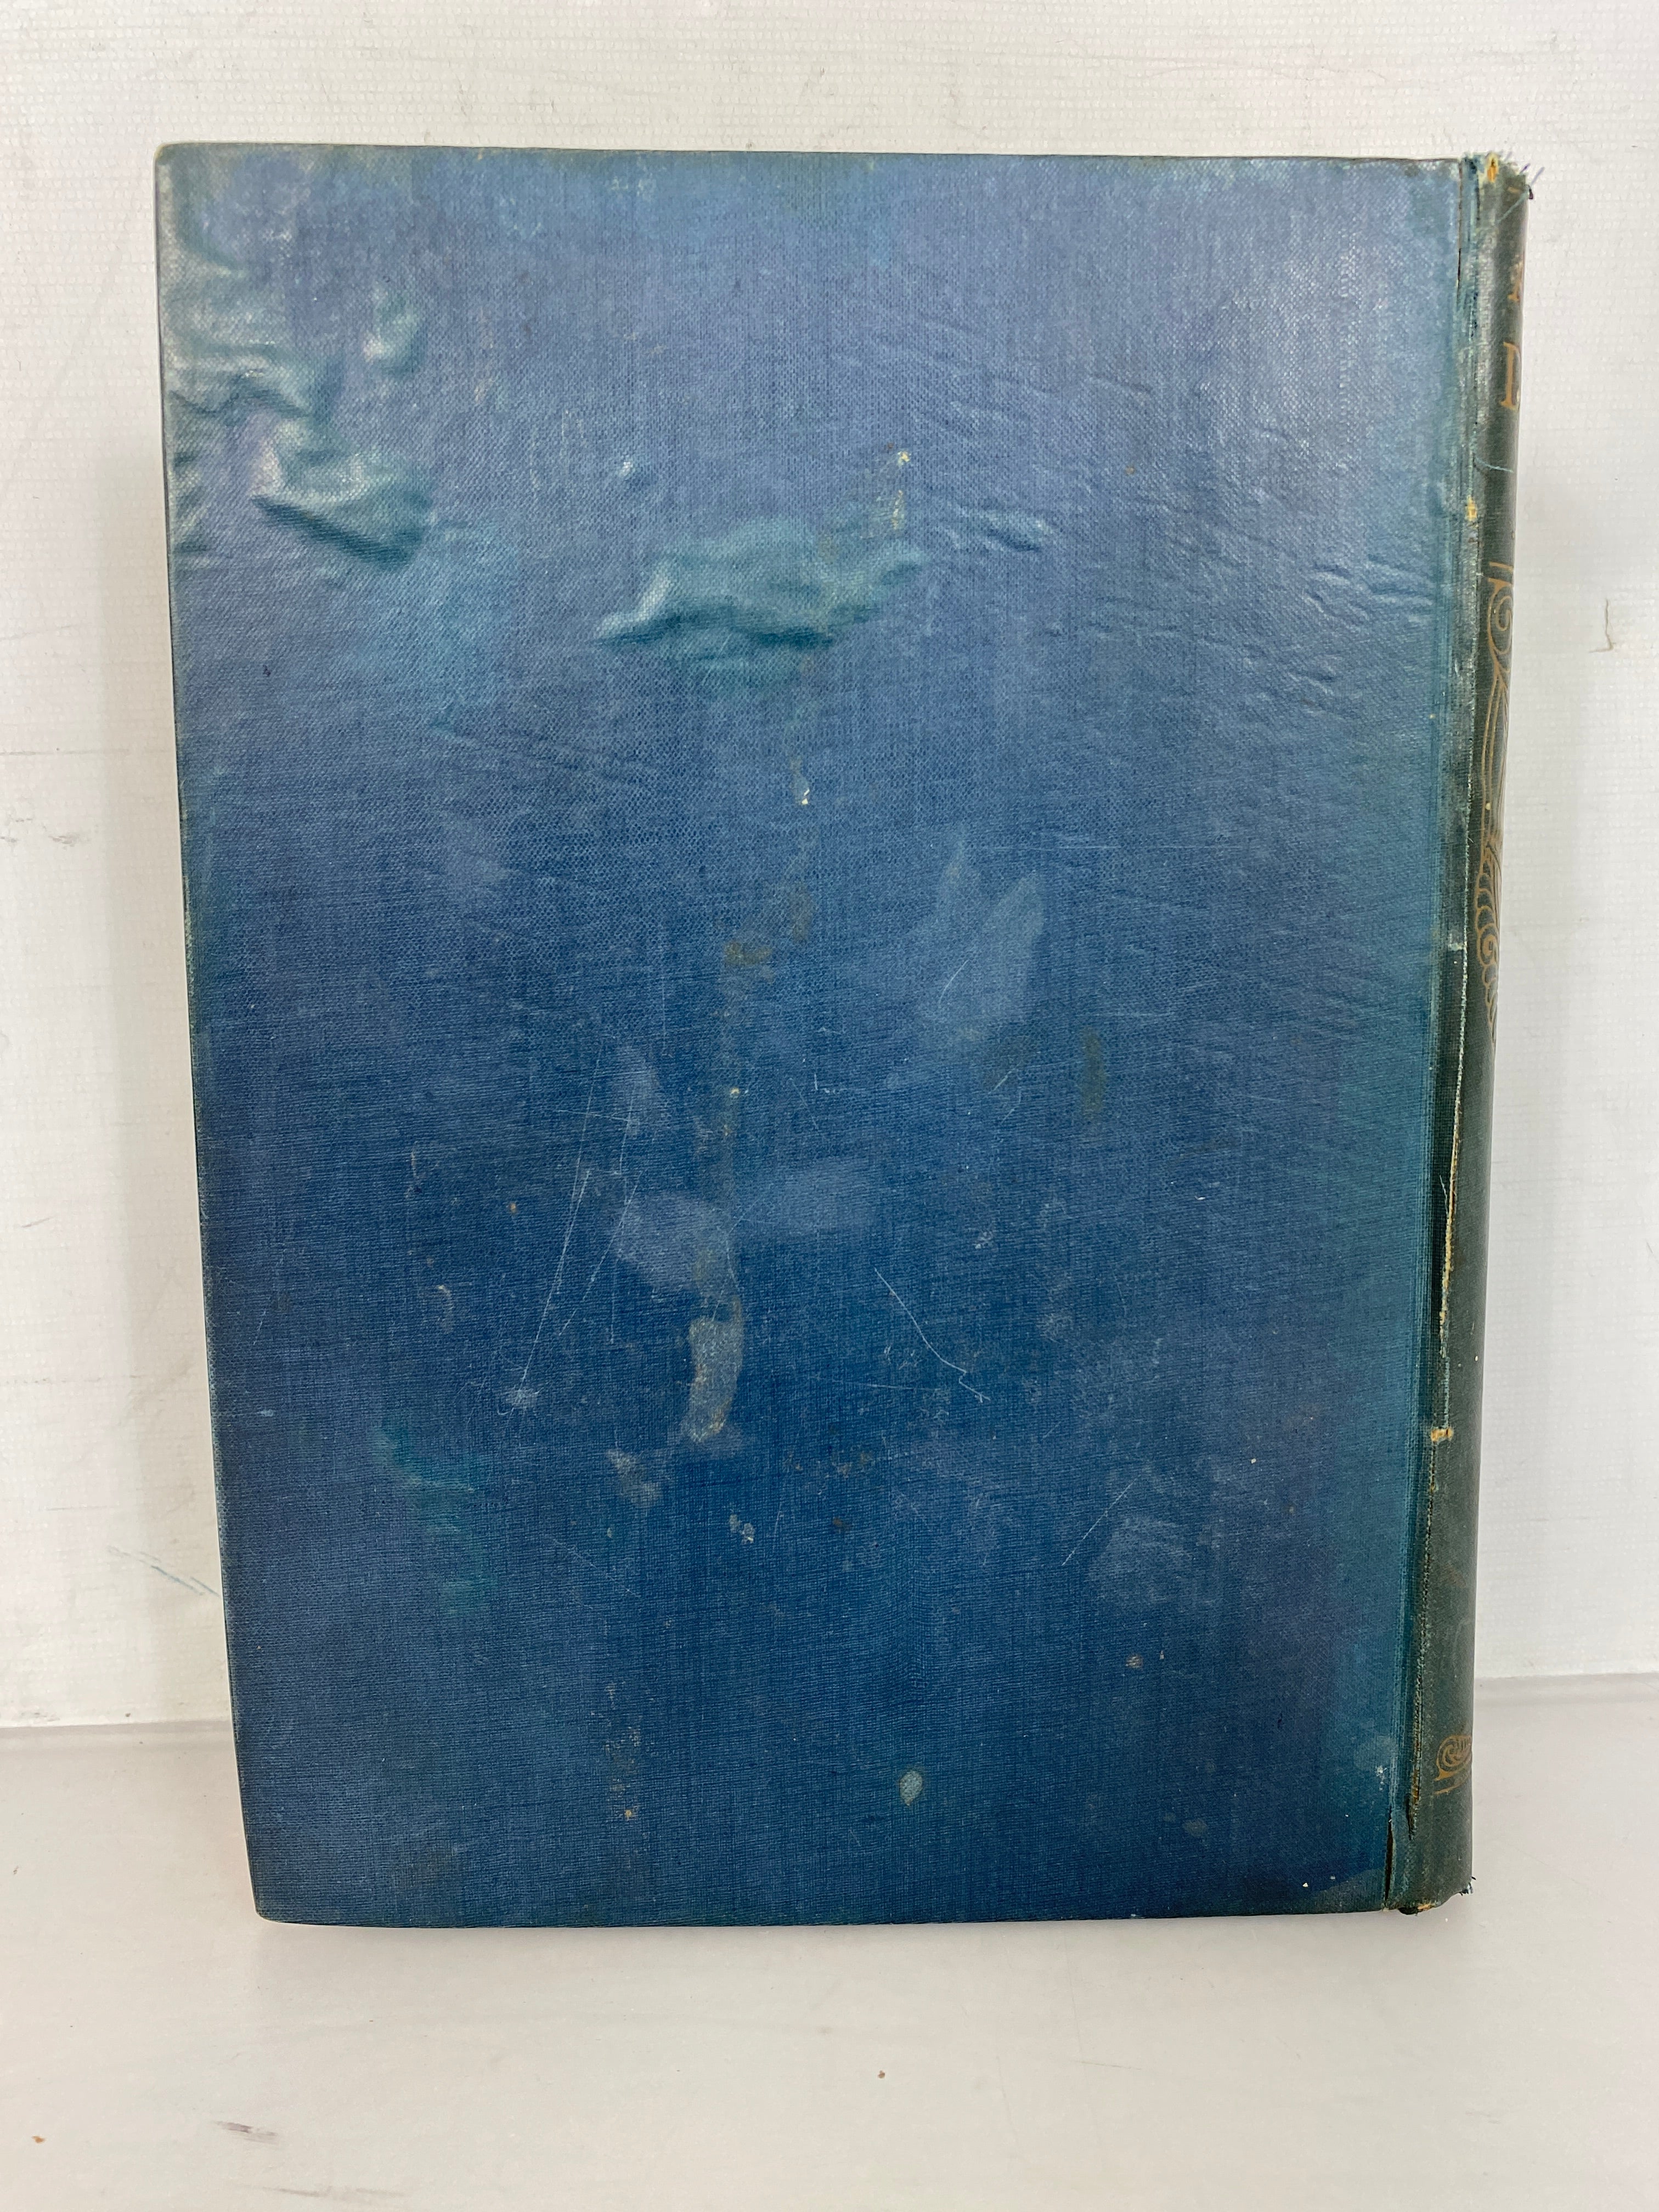 A Book of Discovery by M.B. Synge (c1915) Antique HC First American Edition